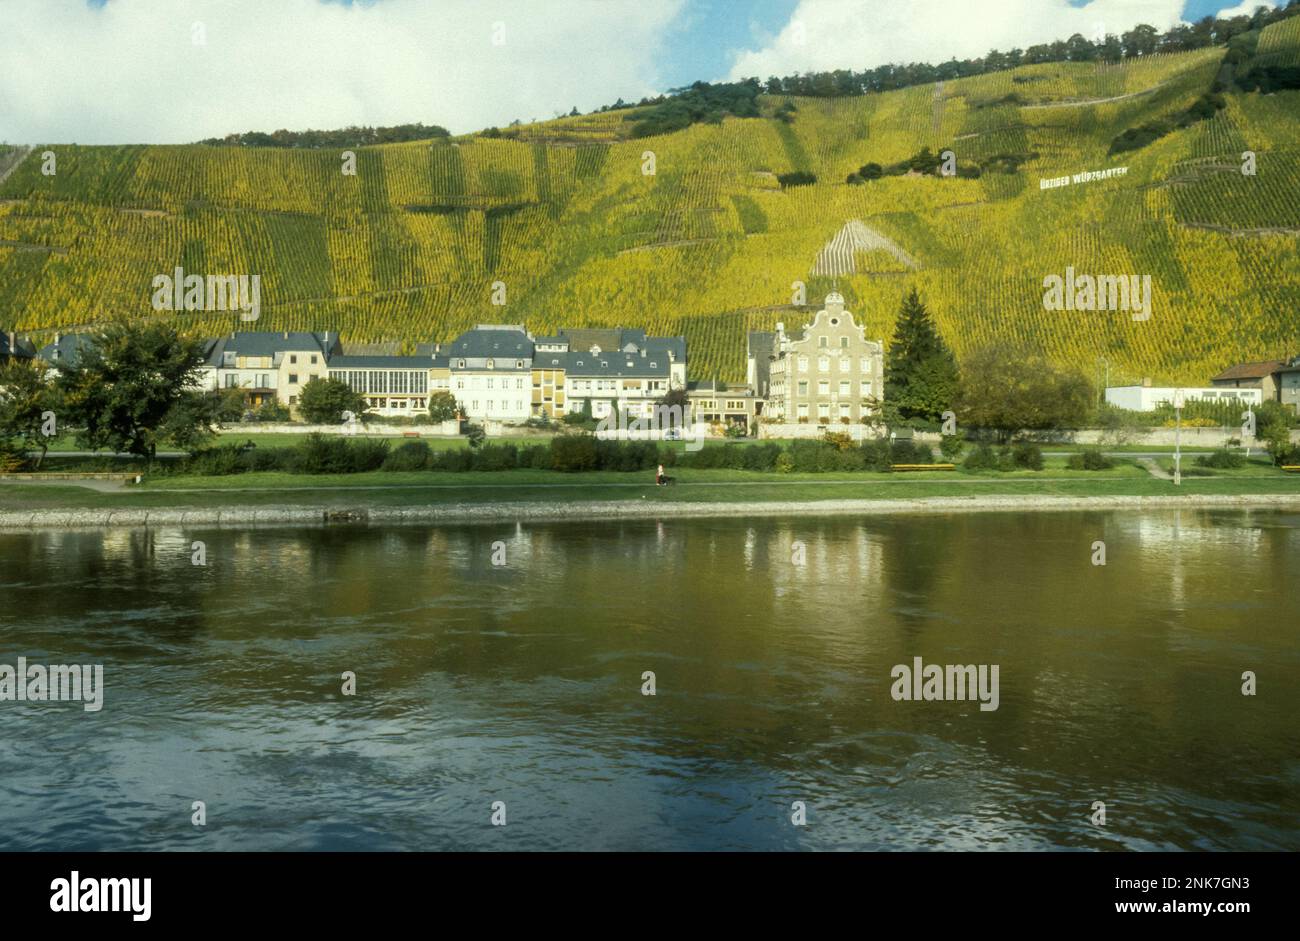 1984 archive image of the Ürziger Würzgarten vineyard around the town of Ürzig on the Moselle, Germany. Stock Photo